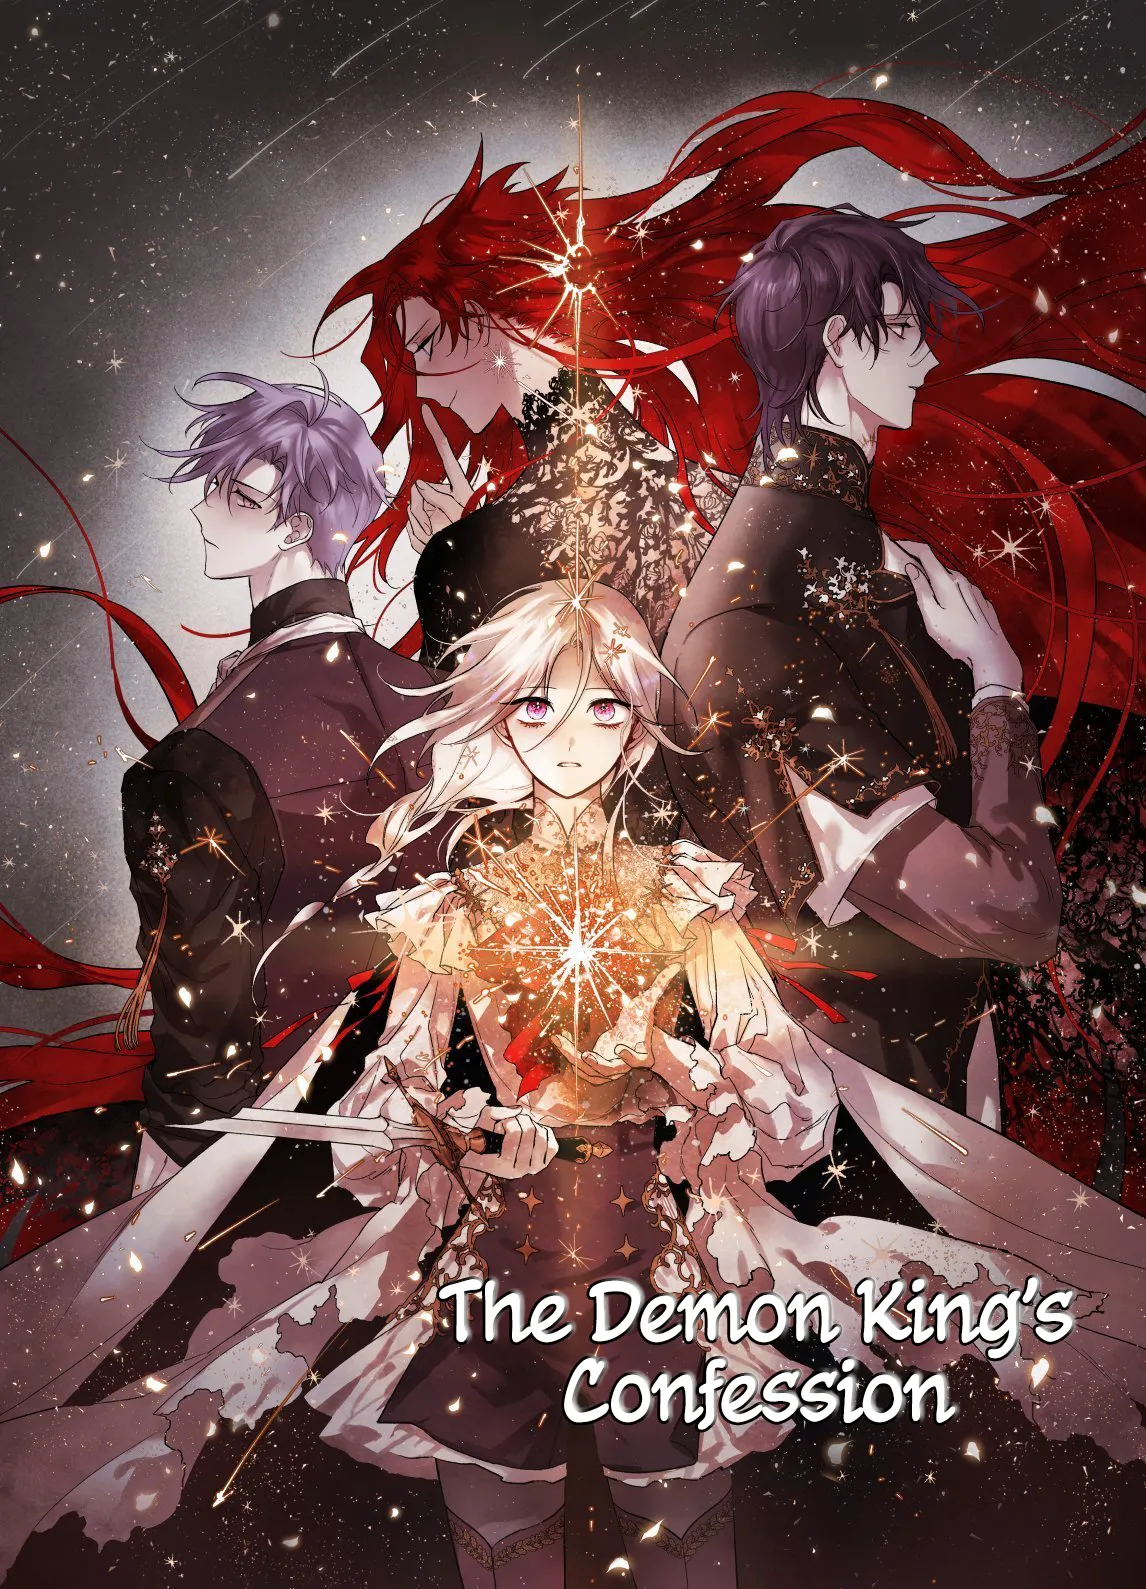 THE DEMON KING'S CONFESSION THUMBNAIL